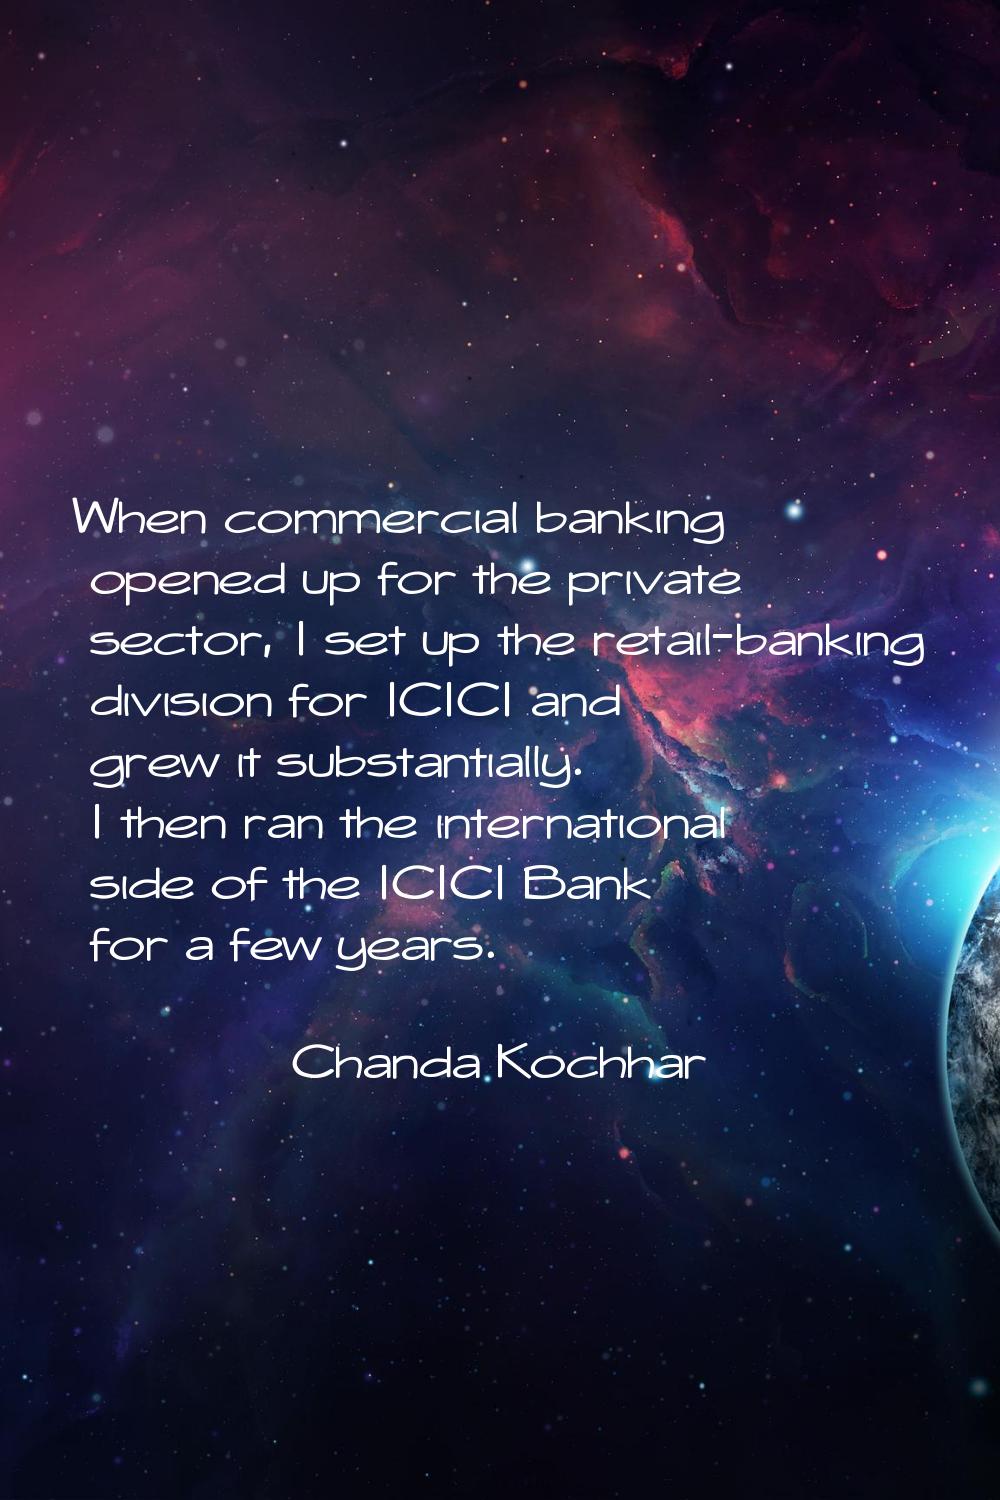 When commercial banking opened up for the private sector, I set up the retail-banking division for 